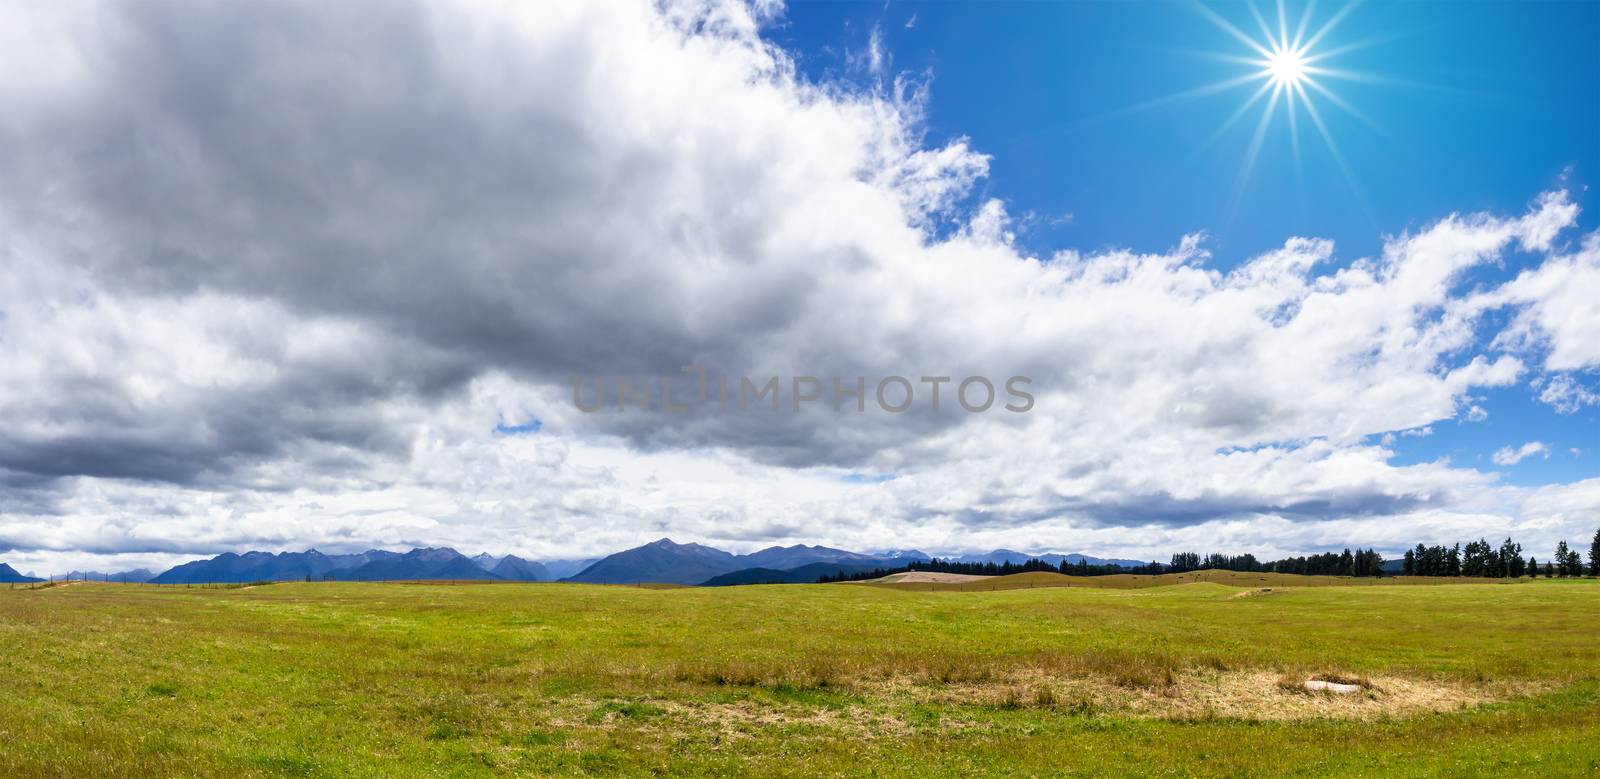 An image of a panoramic landscape in New Zealand